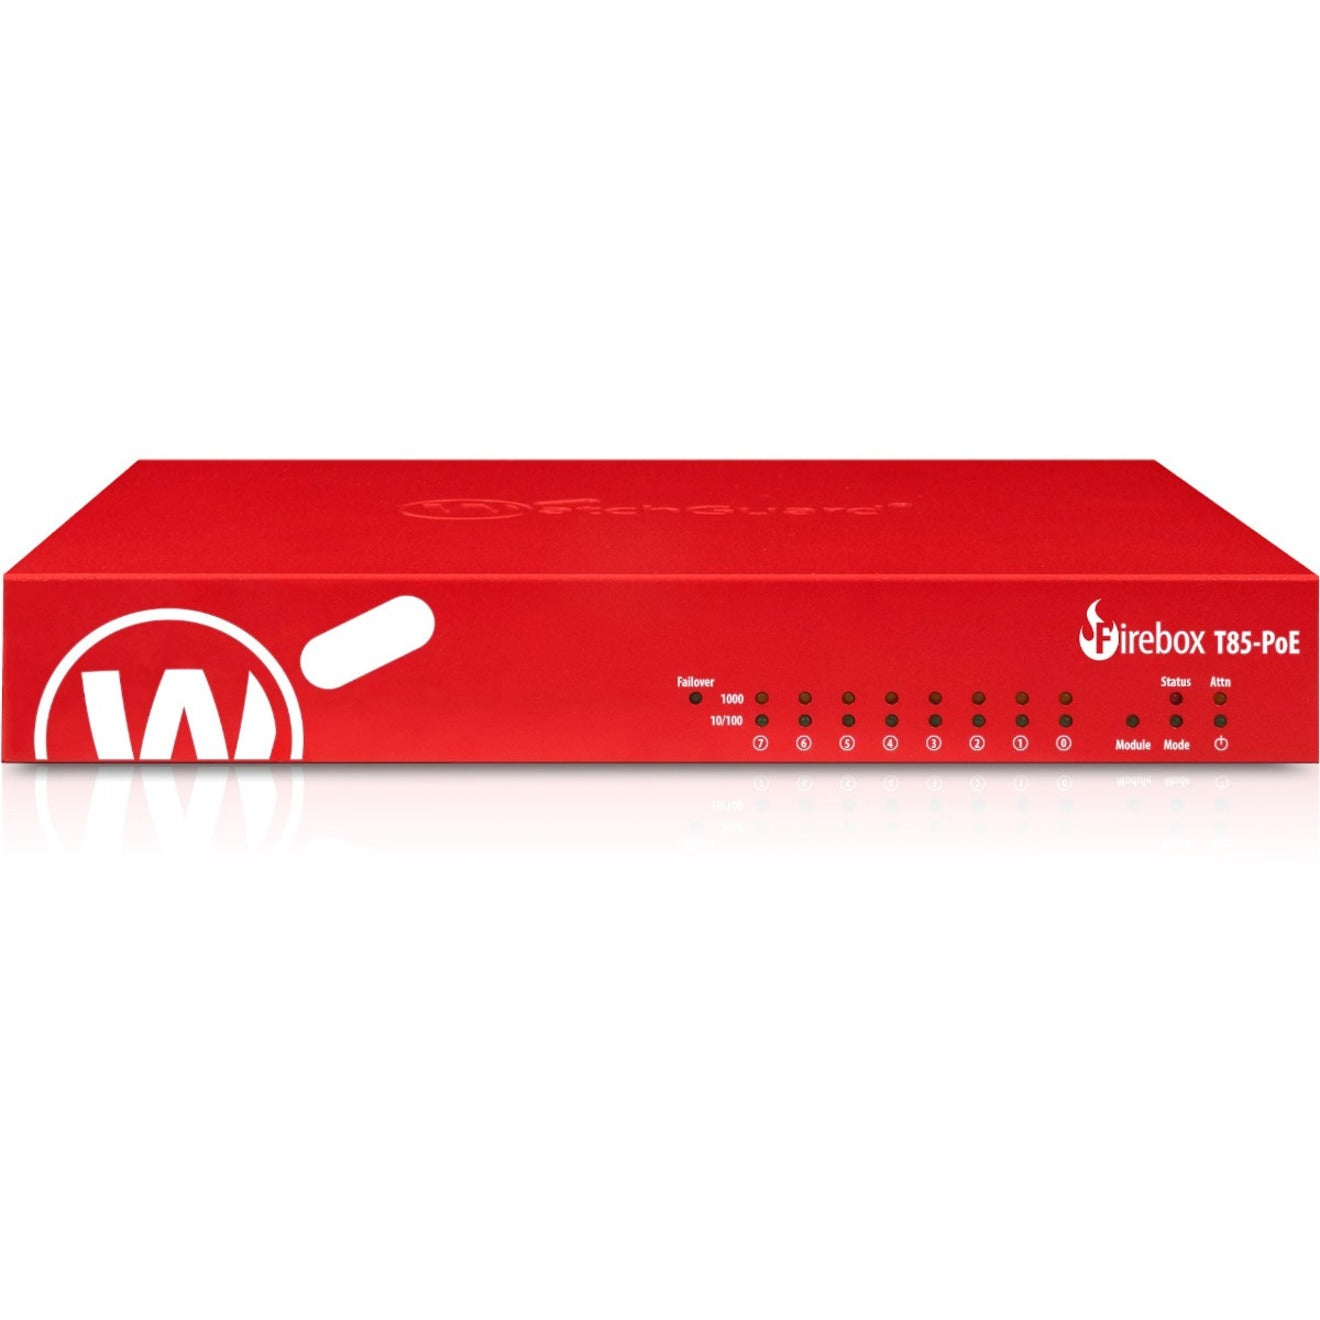 WatchGuard WGT85641-US Firebox T85-PoE Network Security/Firewall Appliance, Total Security Suite, 1 Year